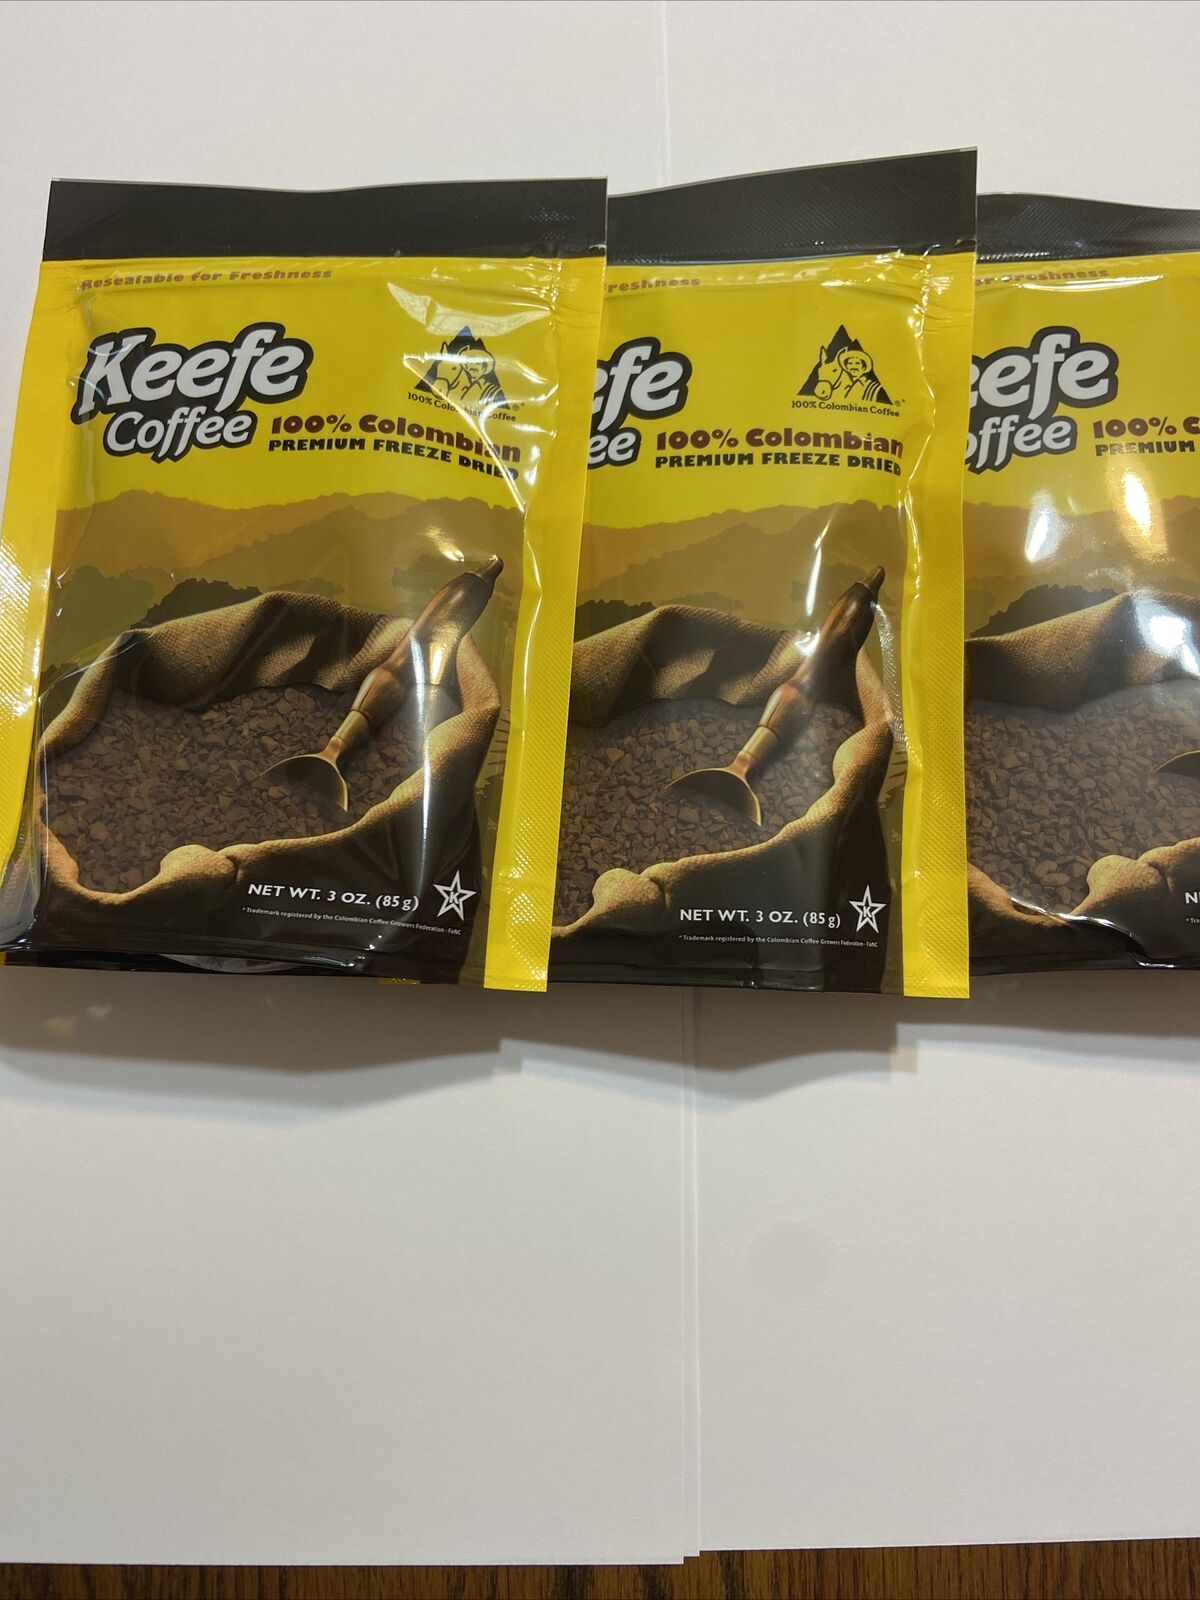 3 Keefe Colombian Dried Freeze Instant Coffee Bags 9oz Total Keefe